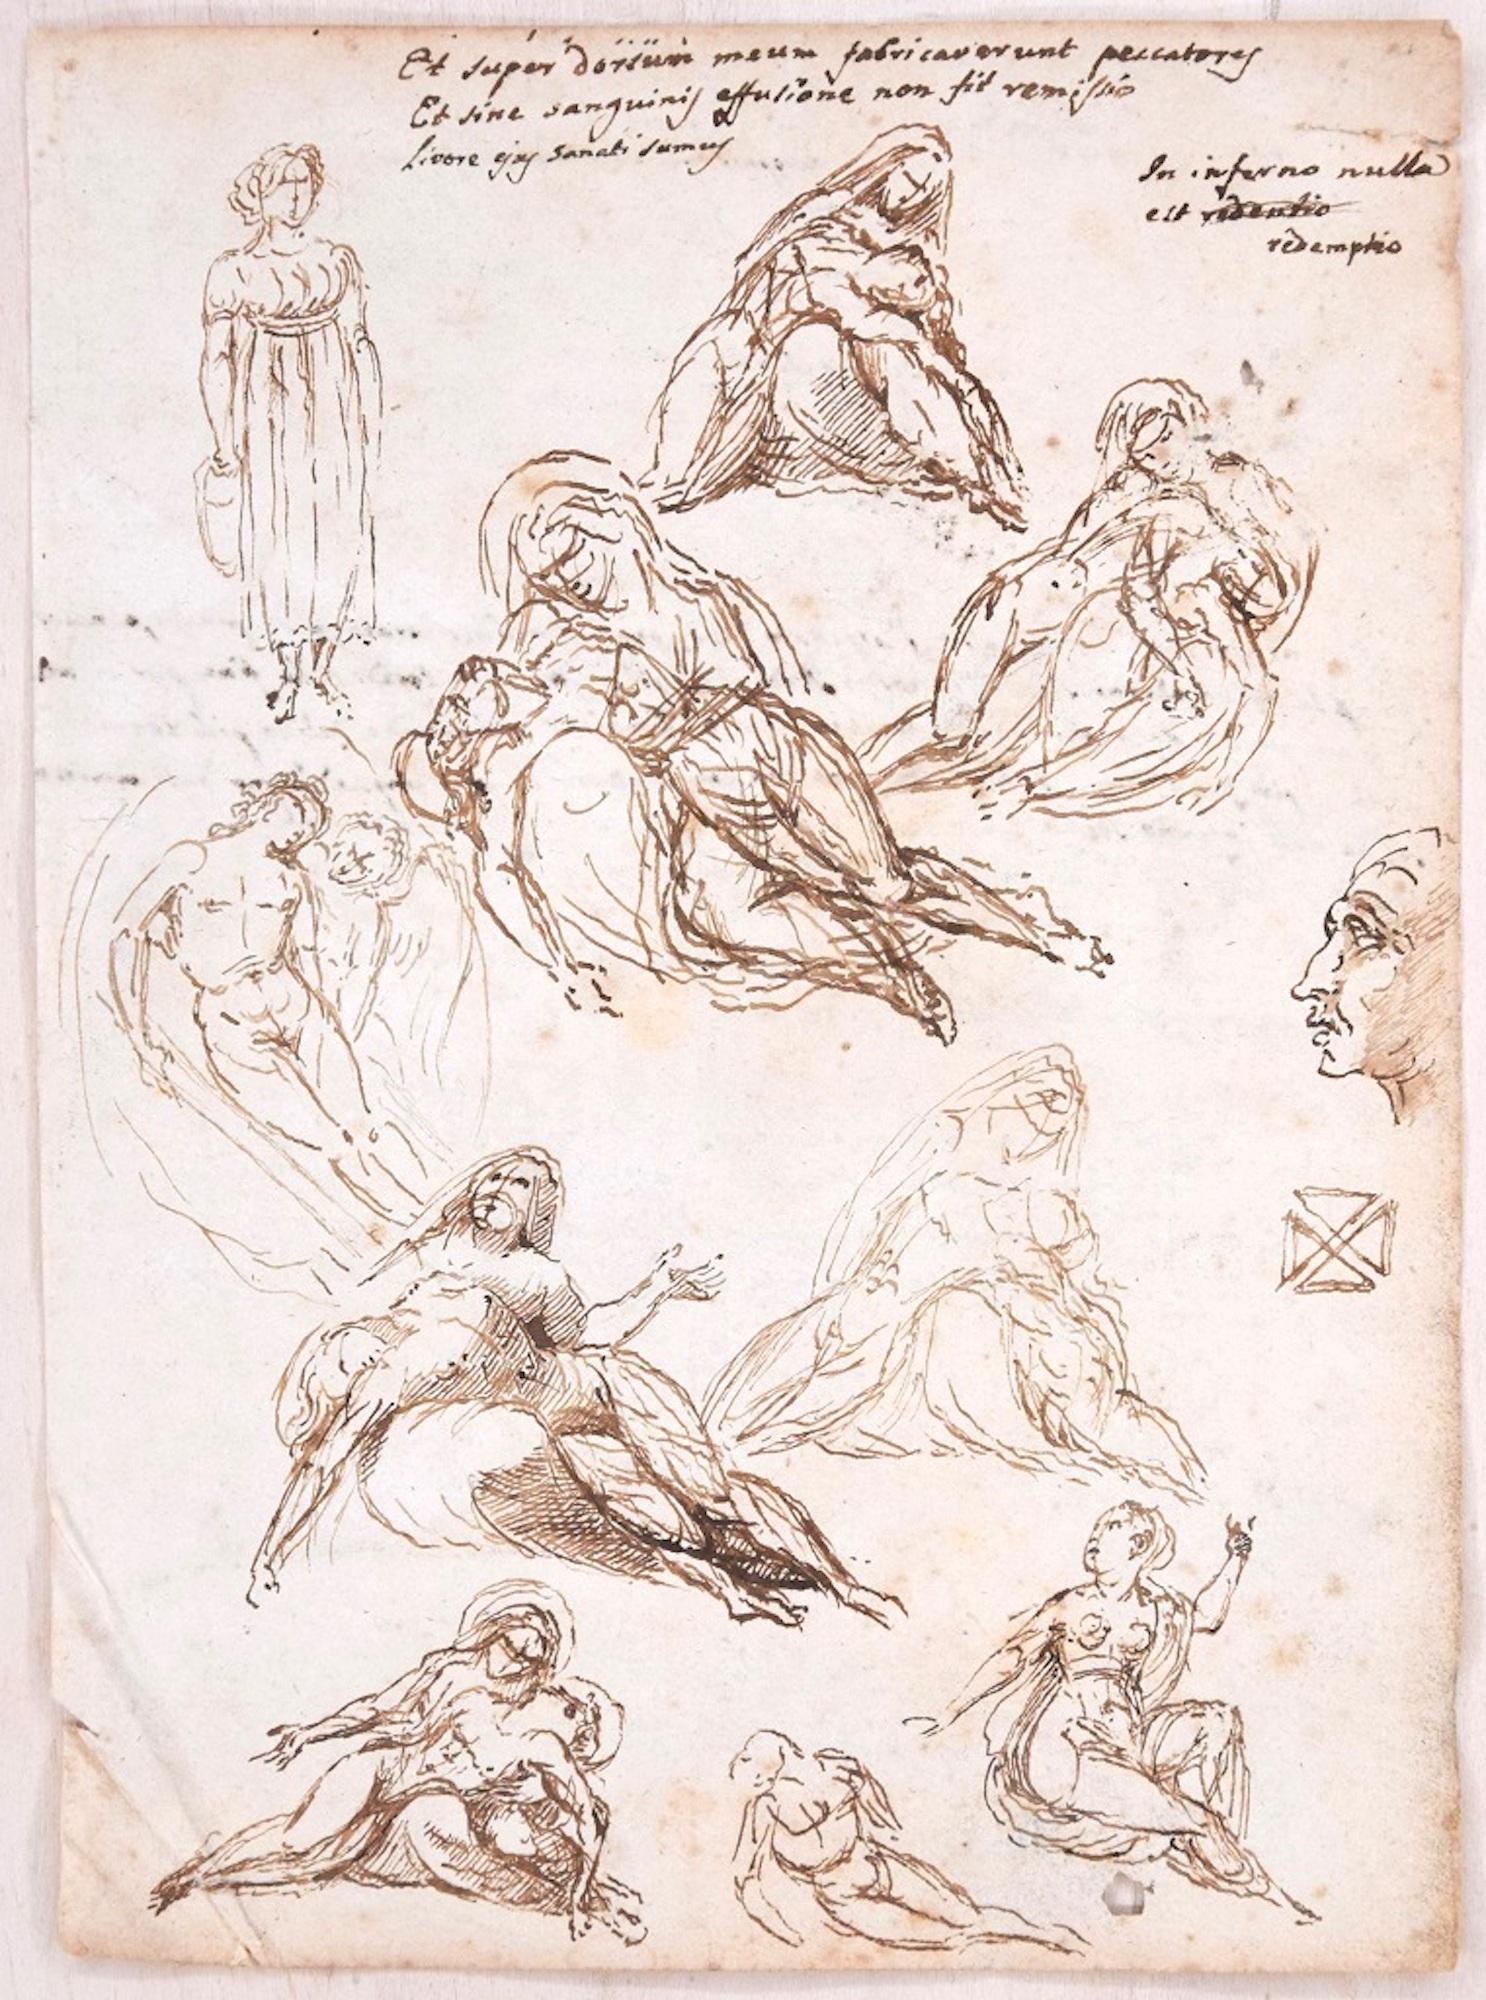 Unknown Figurative Art - Studies and notes - Ink and Pencil on Paper y Anonymous Master - Early 1800